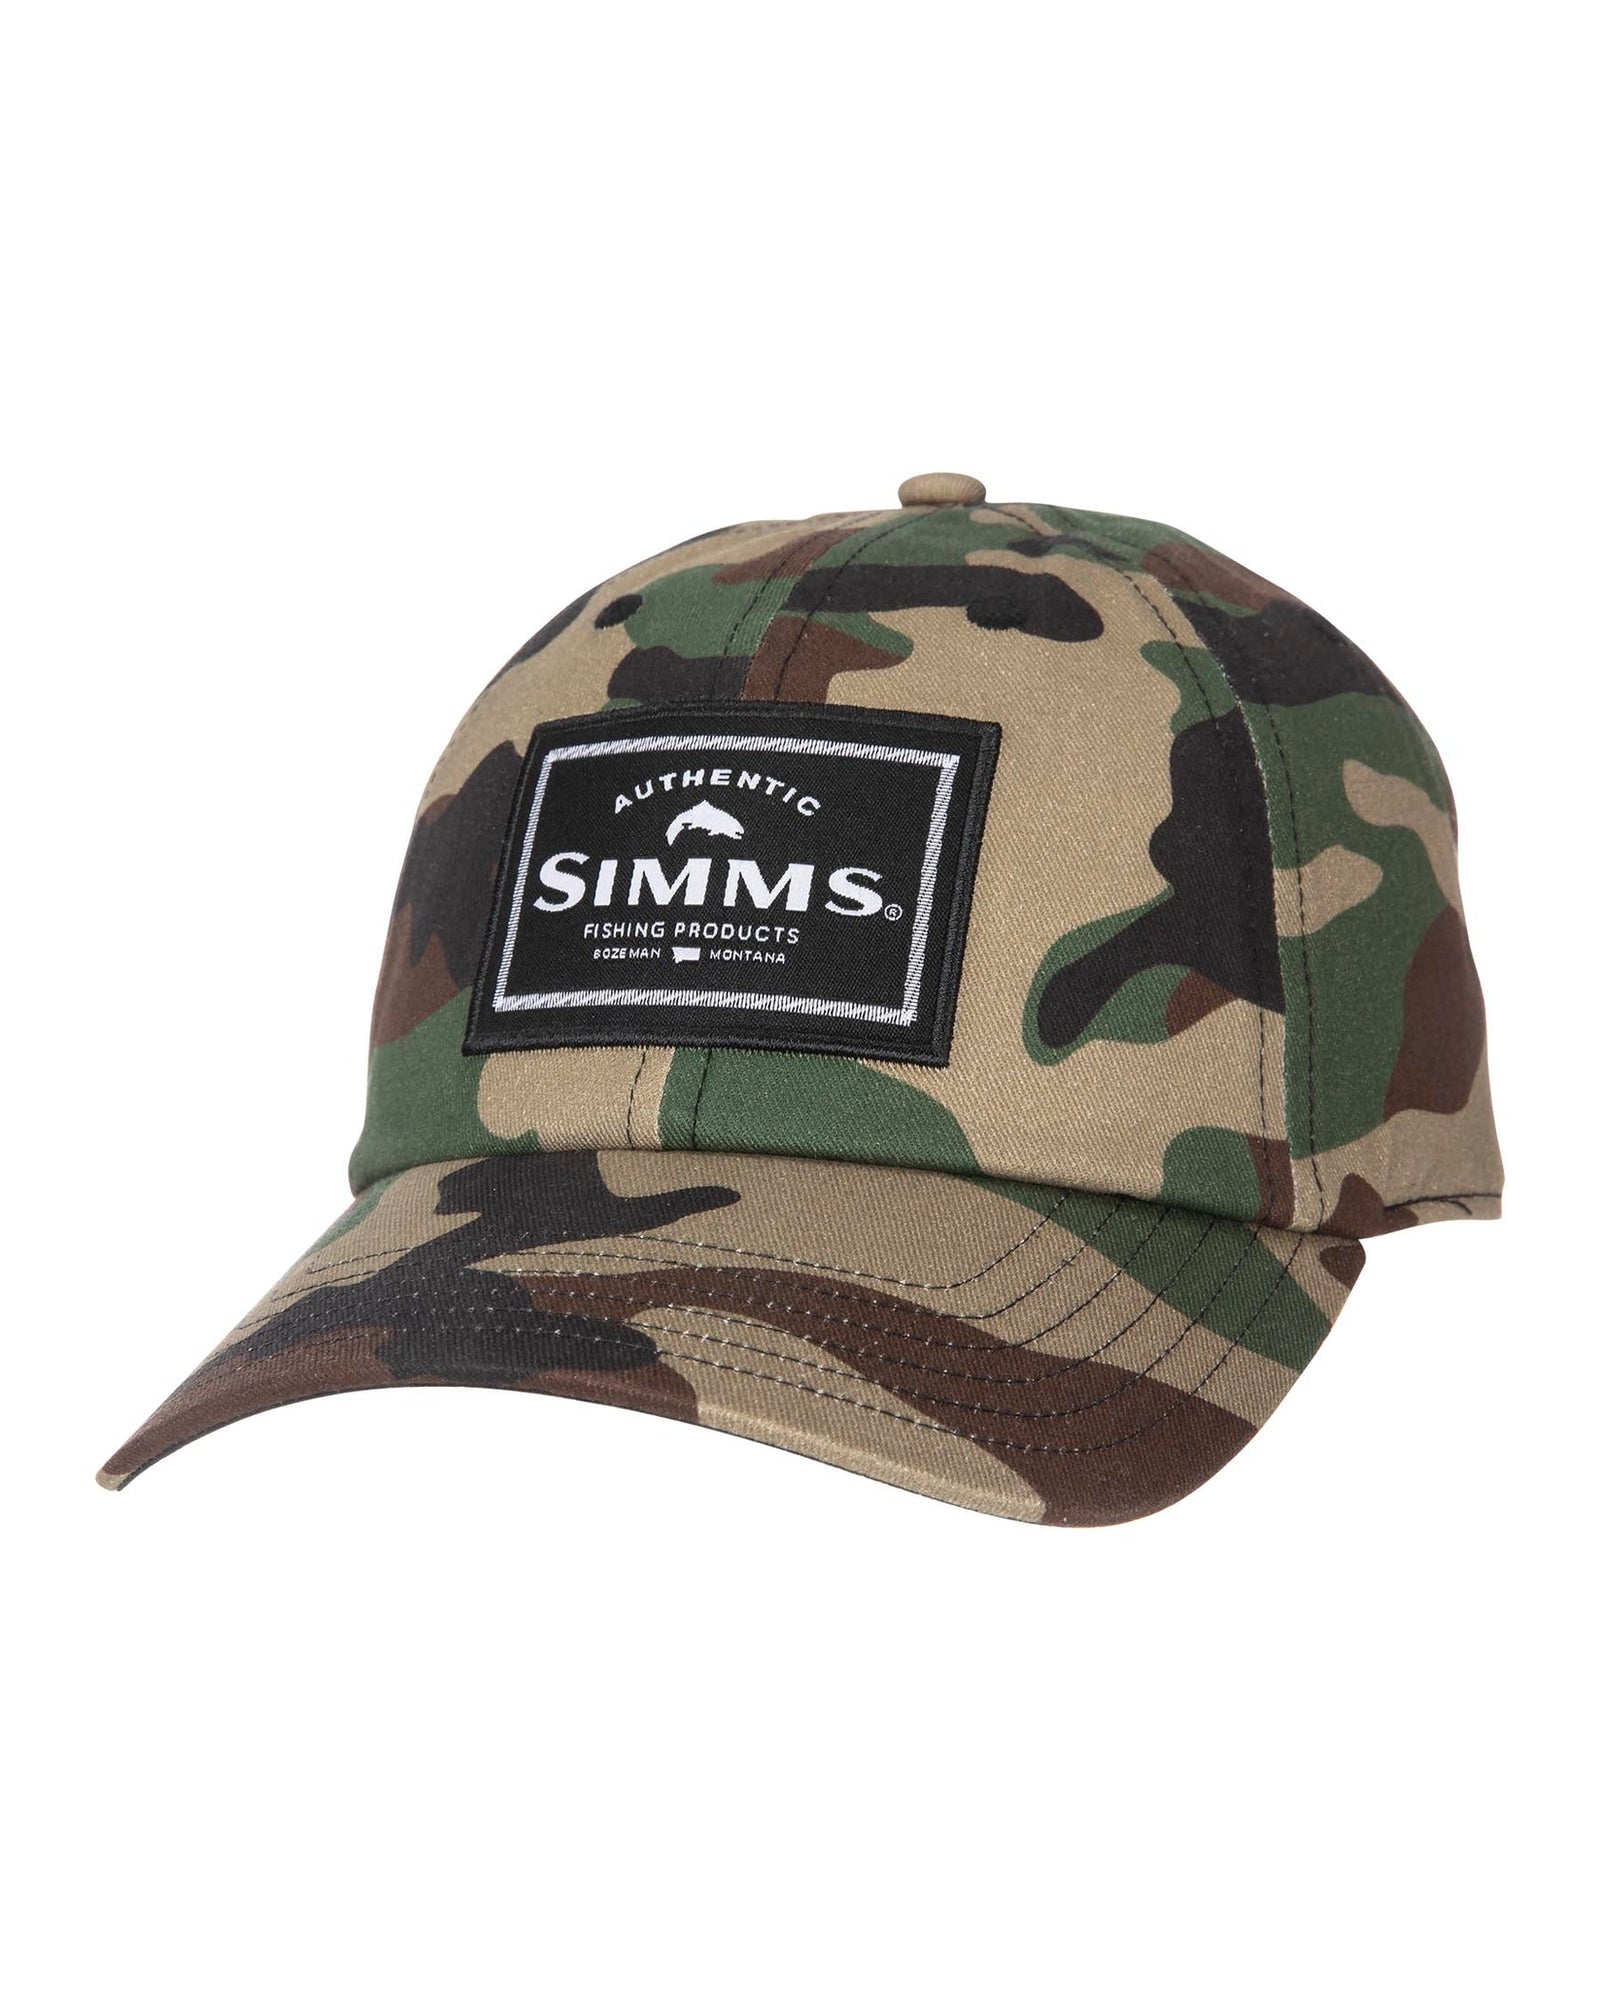 Mens Clothing Tagged Hats - Fin & Fire Fly Shop